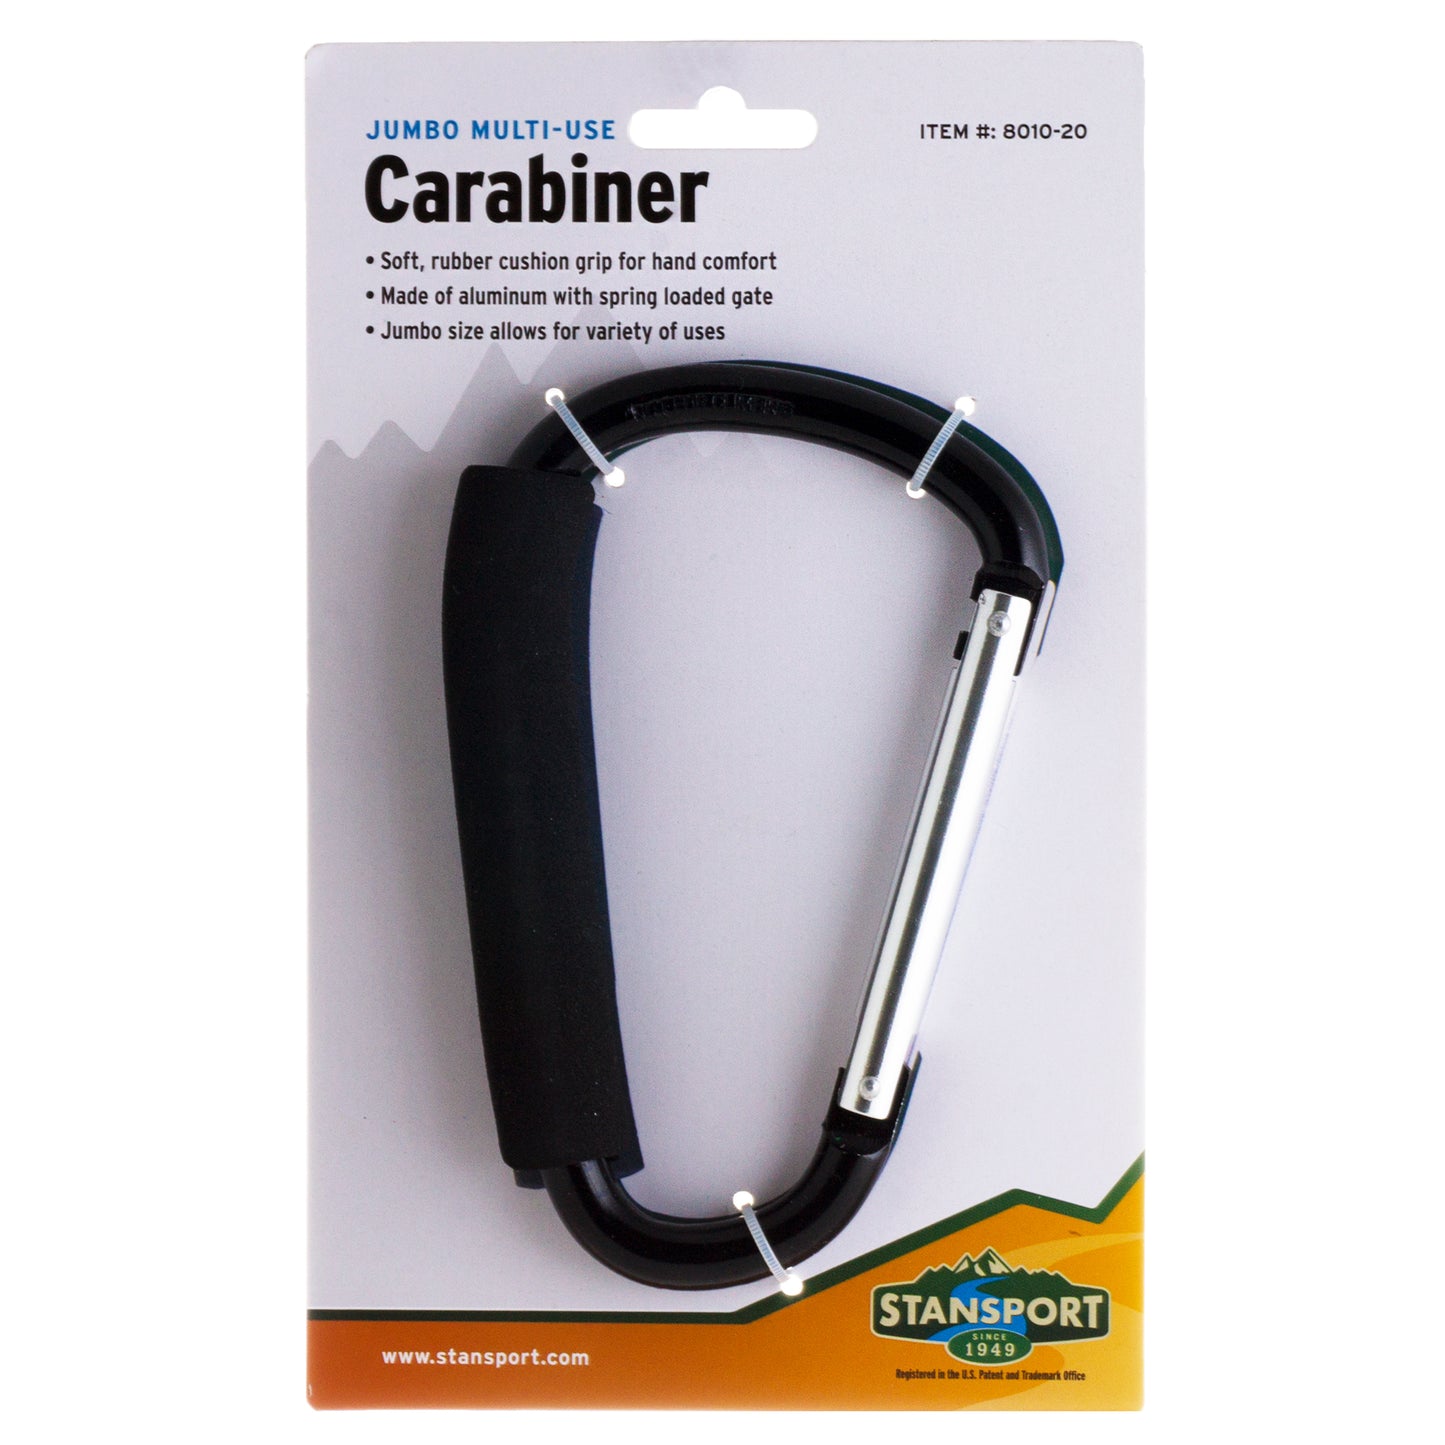 GIANT CARRY HANDLE CARABINER